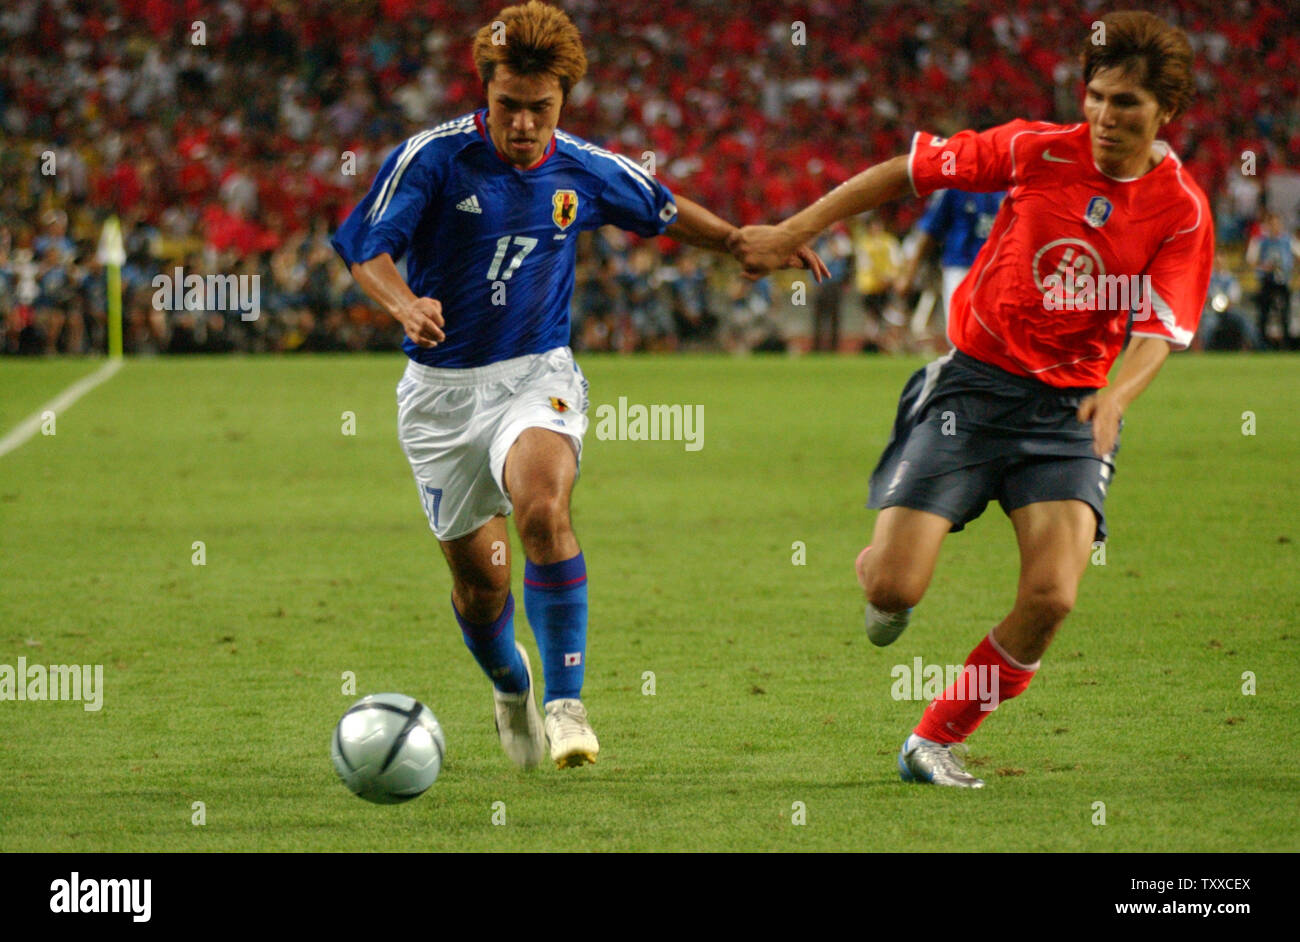 Yuichi Komano (DF, L) of the Japan, and Kim Dong Jin (MF,R) of the South Korea, battle for the ball during the East Asian Football Championship Final Competition 2005 at the Daegu World Cup Stadium, Daegu, South Korea, on August 7, 2005. (UPI Photo/Keizo Mori) Stock Photo